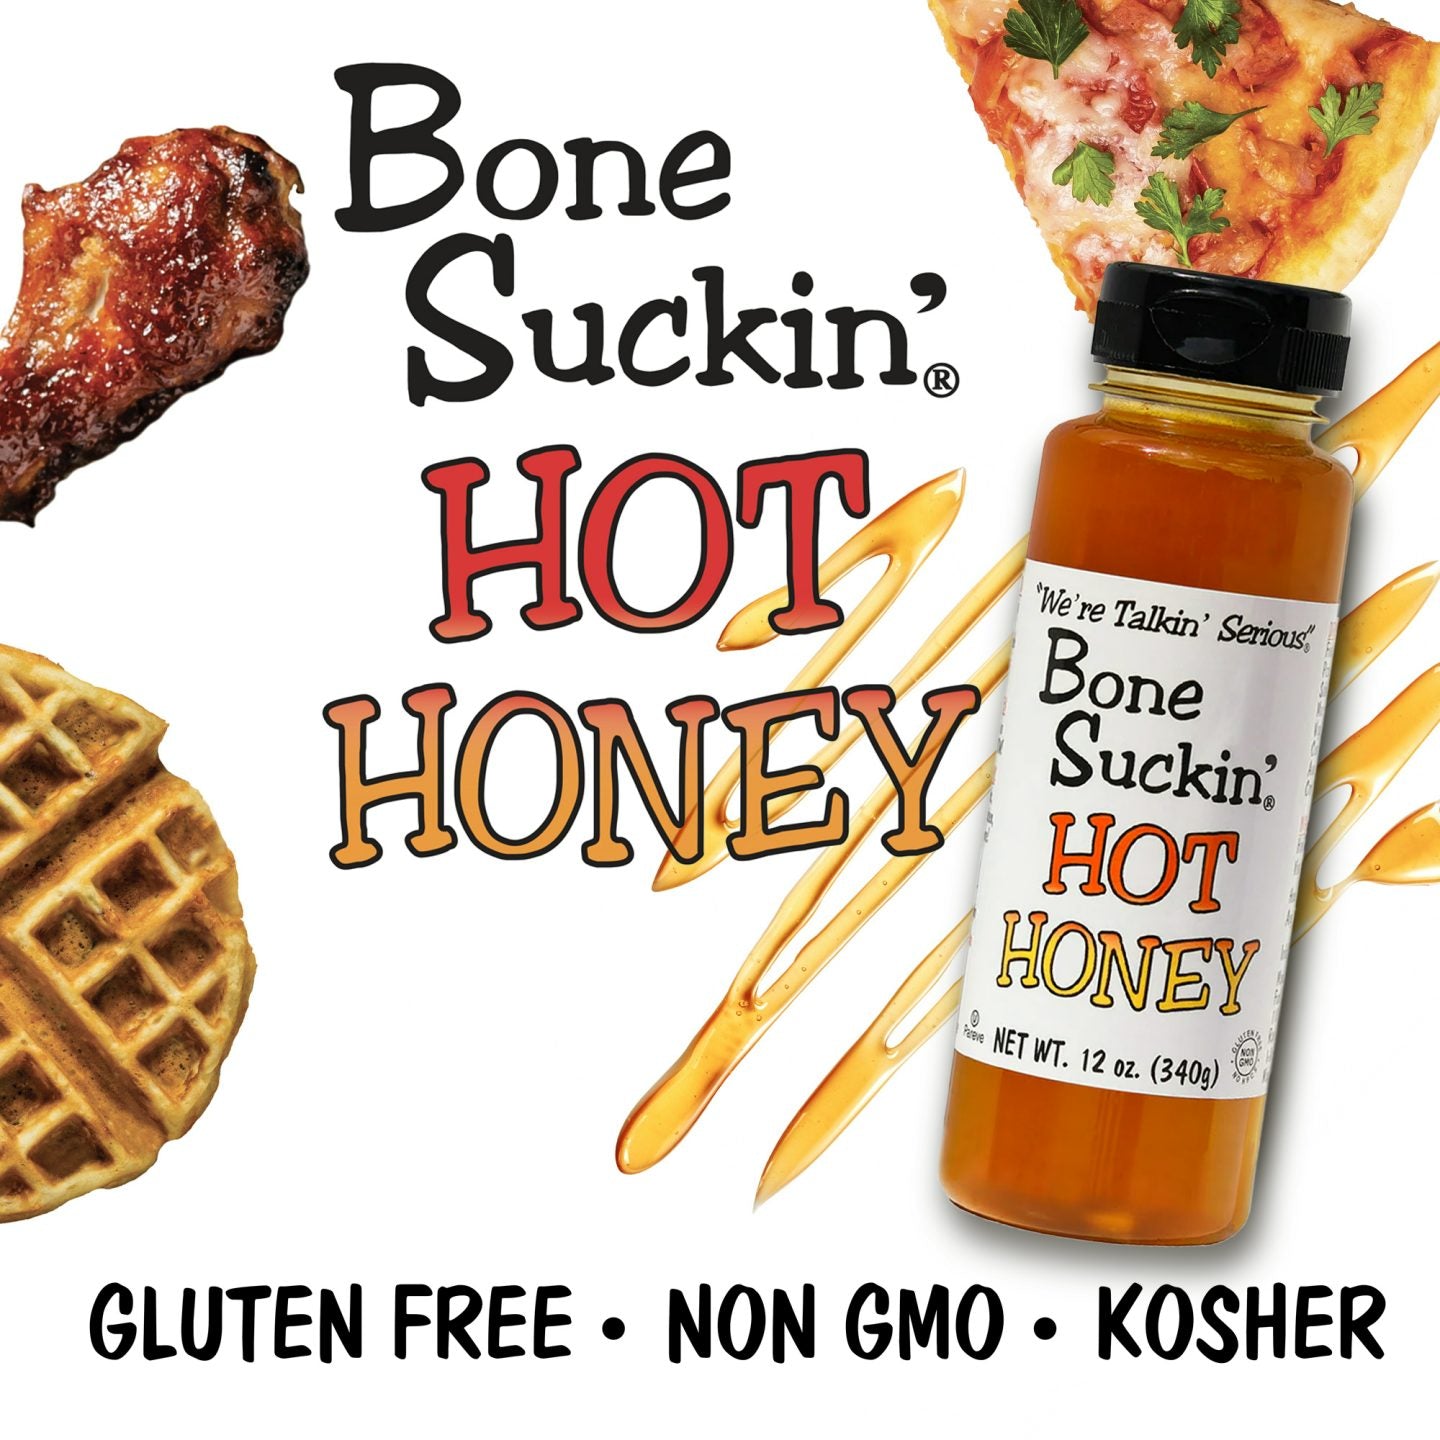 Bone Suckin'® Hot Honey, 12 oz. HIGH-QUALITY INGREDIENTS: Made with high-quality Non Gmo, Kosher, Pareve, Gluten Free, Dairy Free ingredients with No High Fructose Syrup: Bone Suckin' Hot Honey is crafted using the perfect blend of high quality honey, apple cider vinegar, and chili extract, ensuring a delicious sweet, hot & flavorful experience that is great for the whole family!